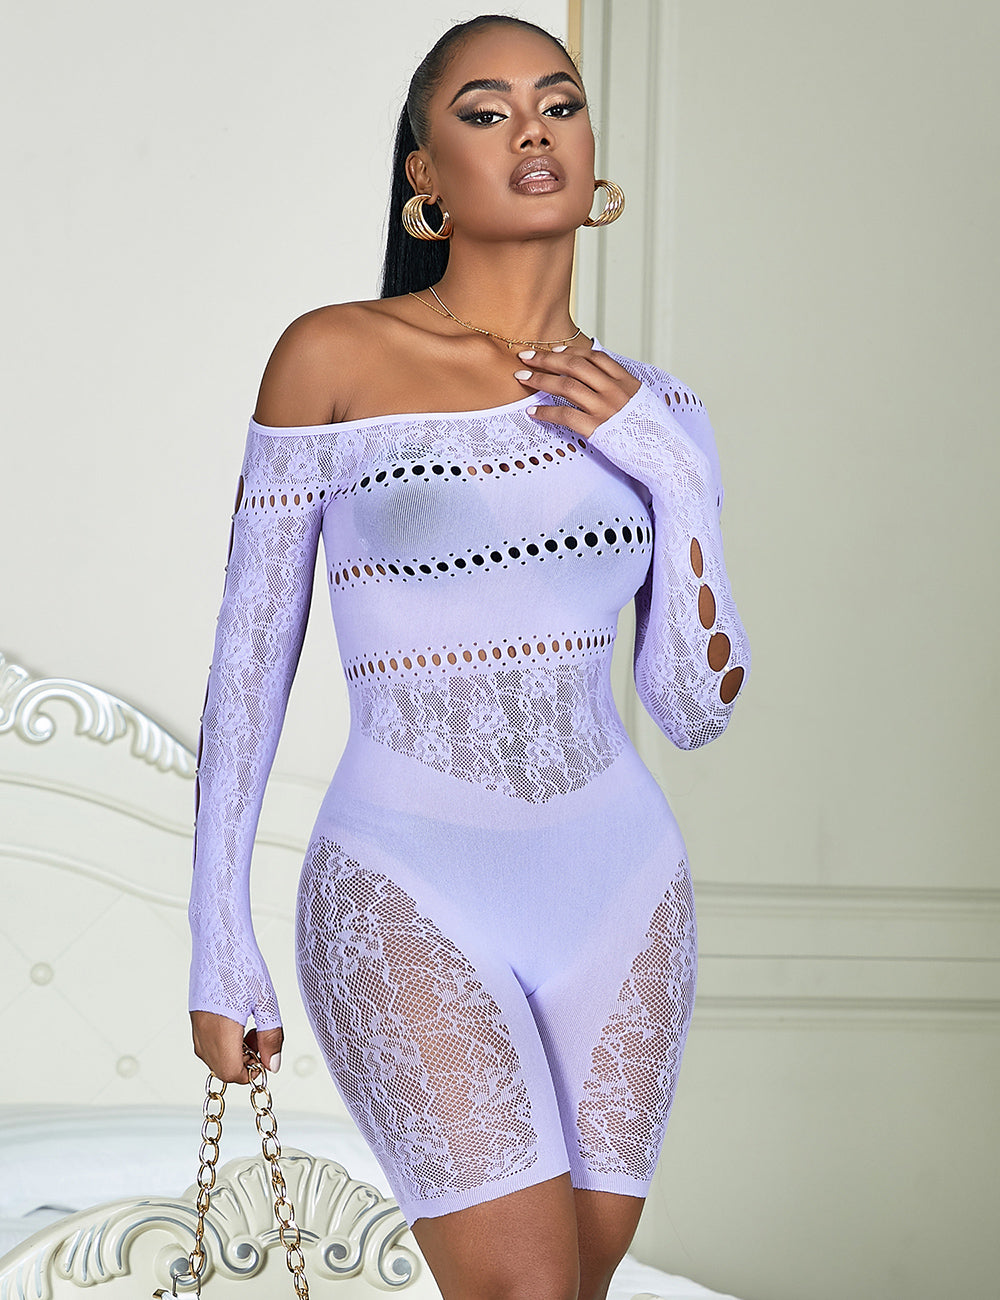 RAW’s Long-Sleeved One Shoulder Sexy Mesh Bodystocking